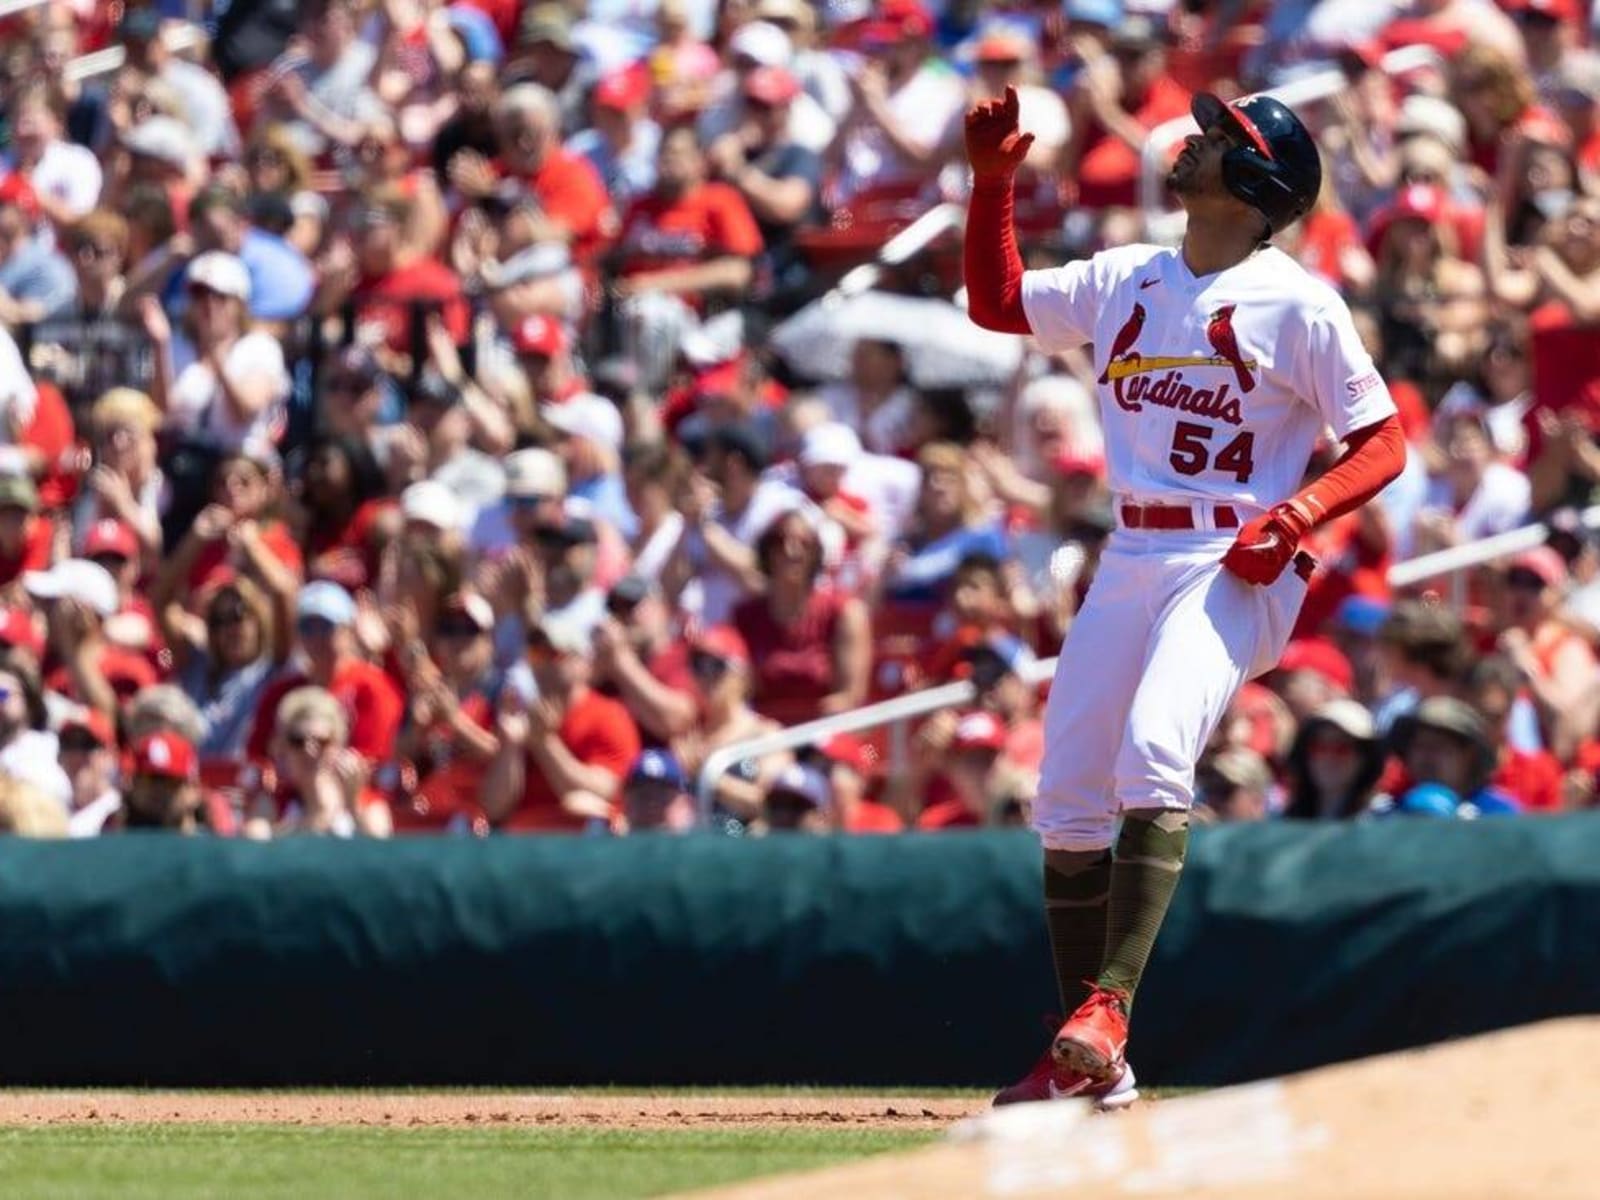 Cardinals beat Reds again, 4-3. Contreras drives in three in victory